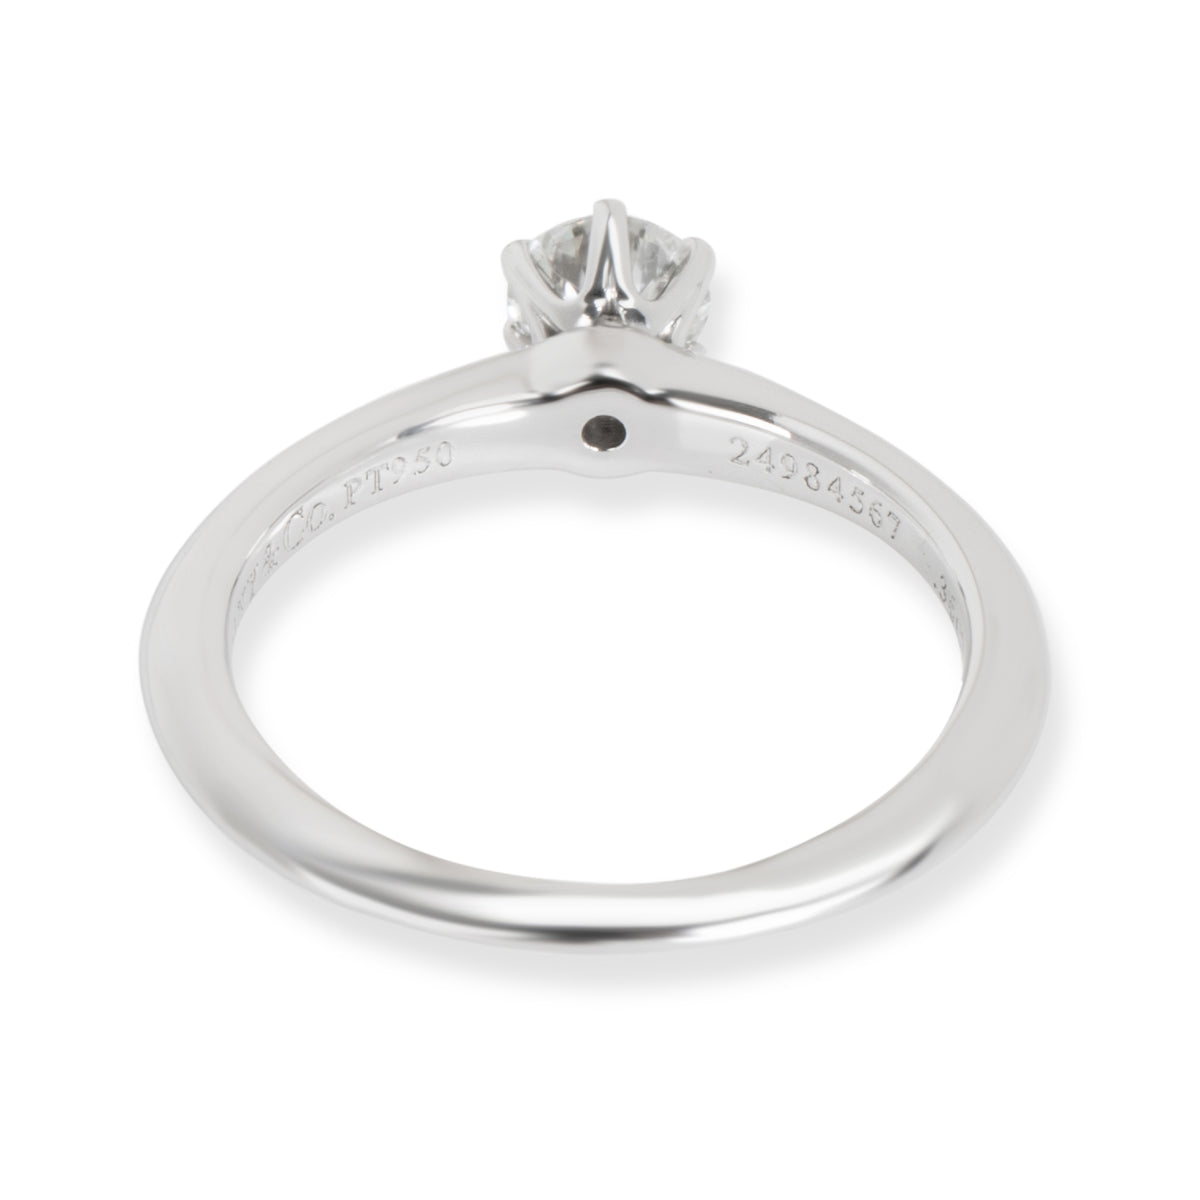 Tiffany & Co. Diamond Engagement Ring in Platinum (0.36 ct H/SI1)